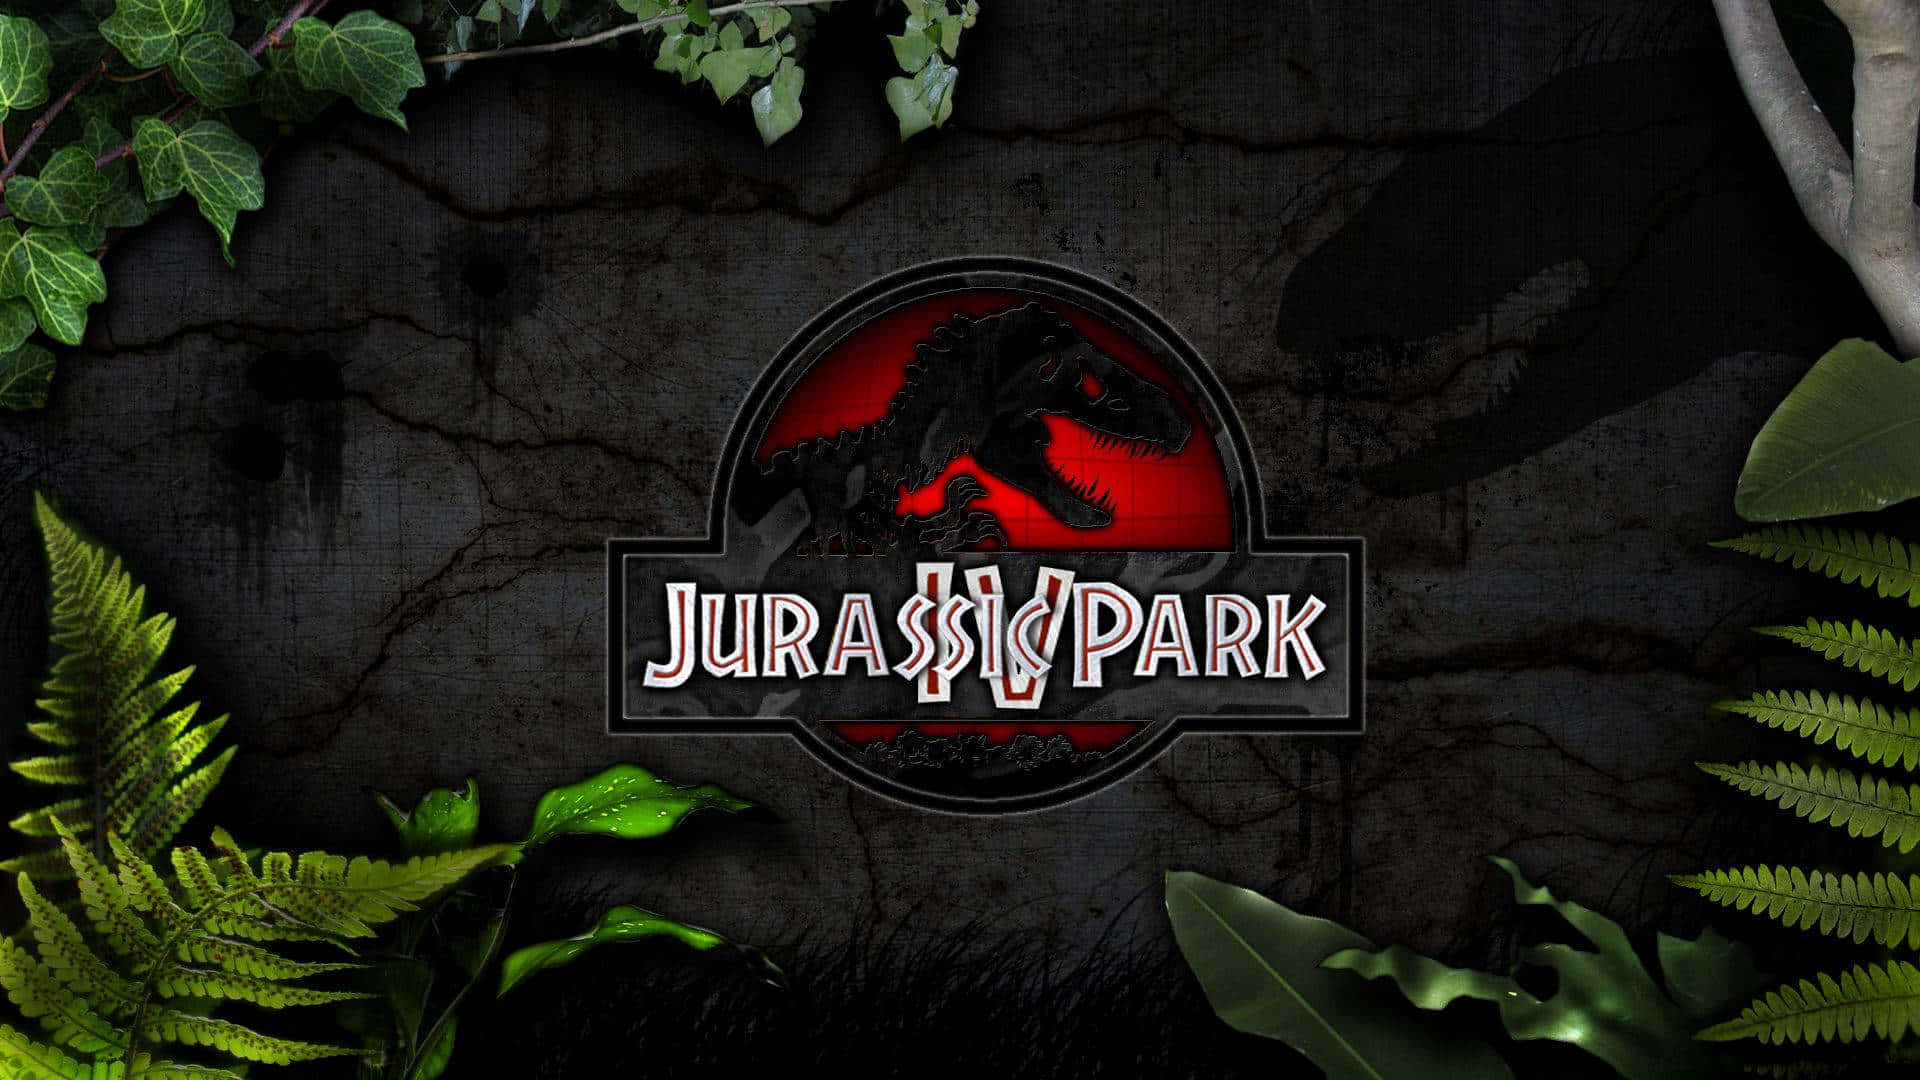 "Explore the unbridled beauty of Jurassic Park from the comfort of your own home."